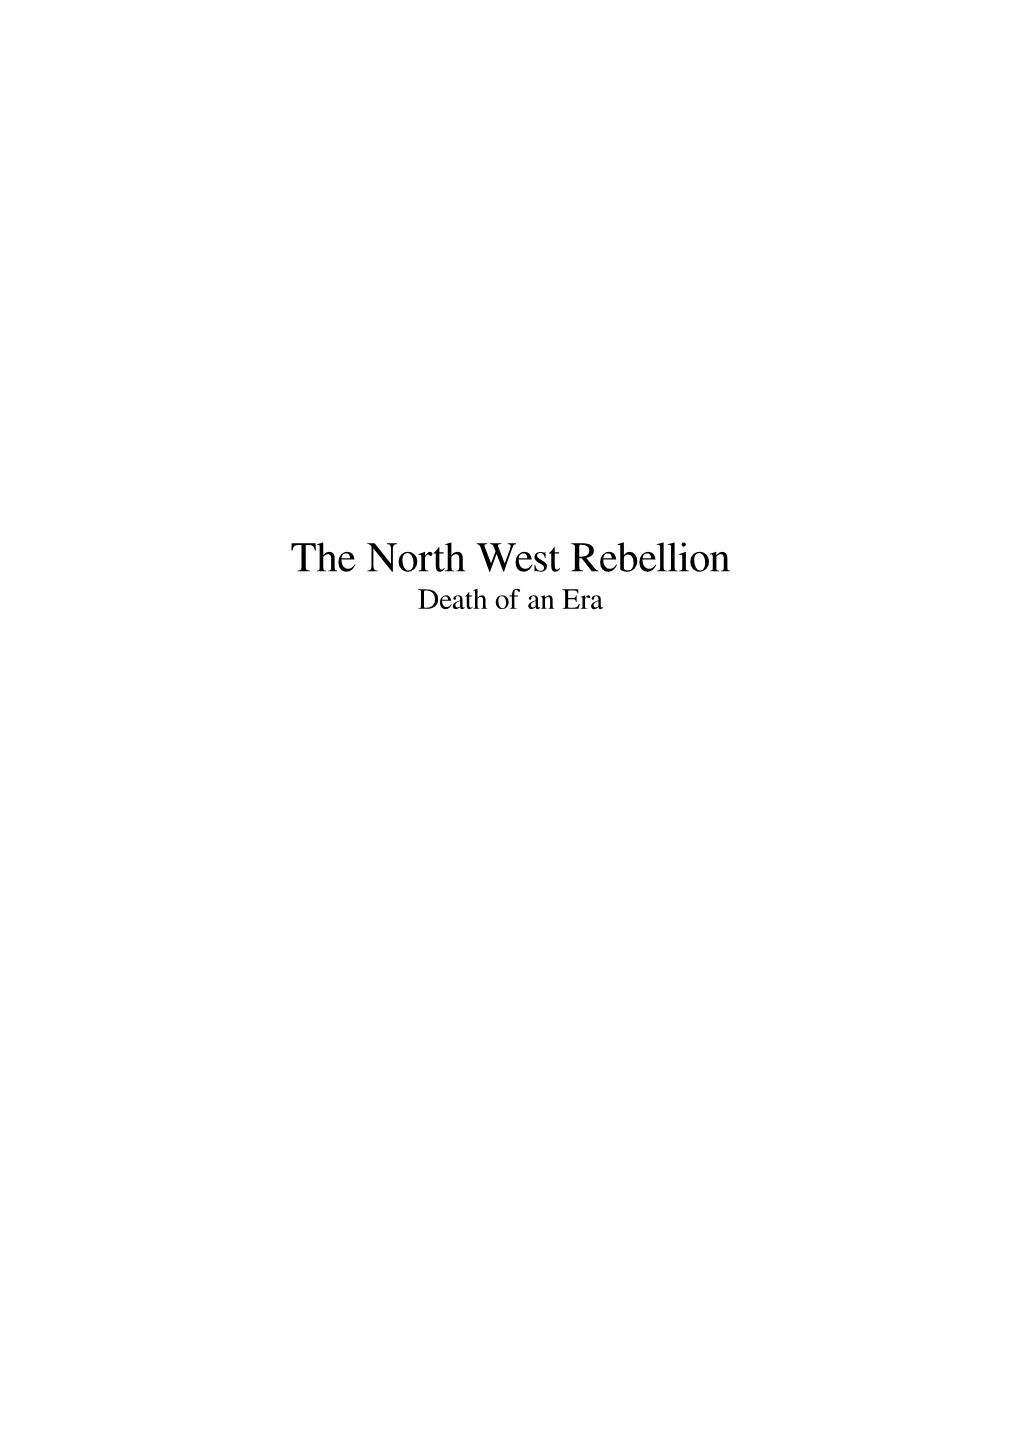 The North West Rebellion Death of an Era Contents